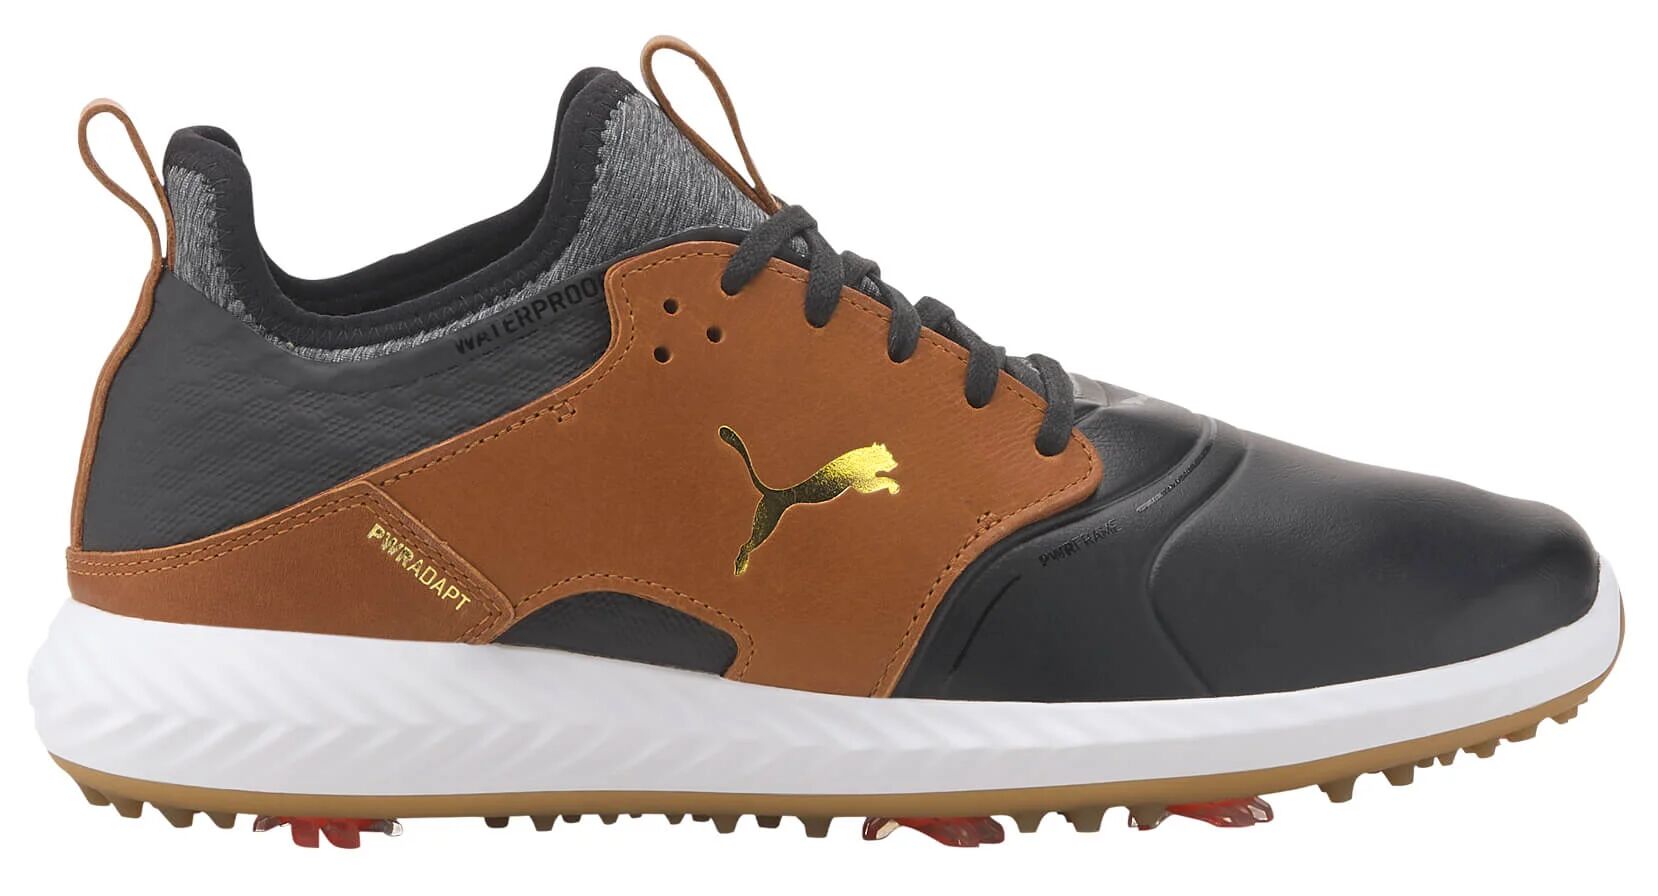 Puma Men's Ignite Pwradapt Caged Crafted Golf Shoes in Black/Brown/Gold, Size 11.5